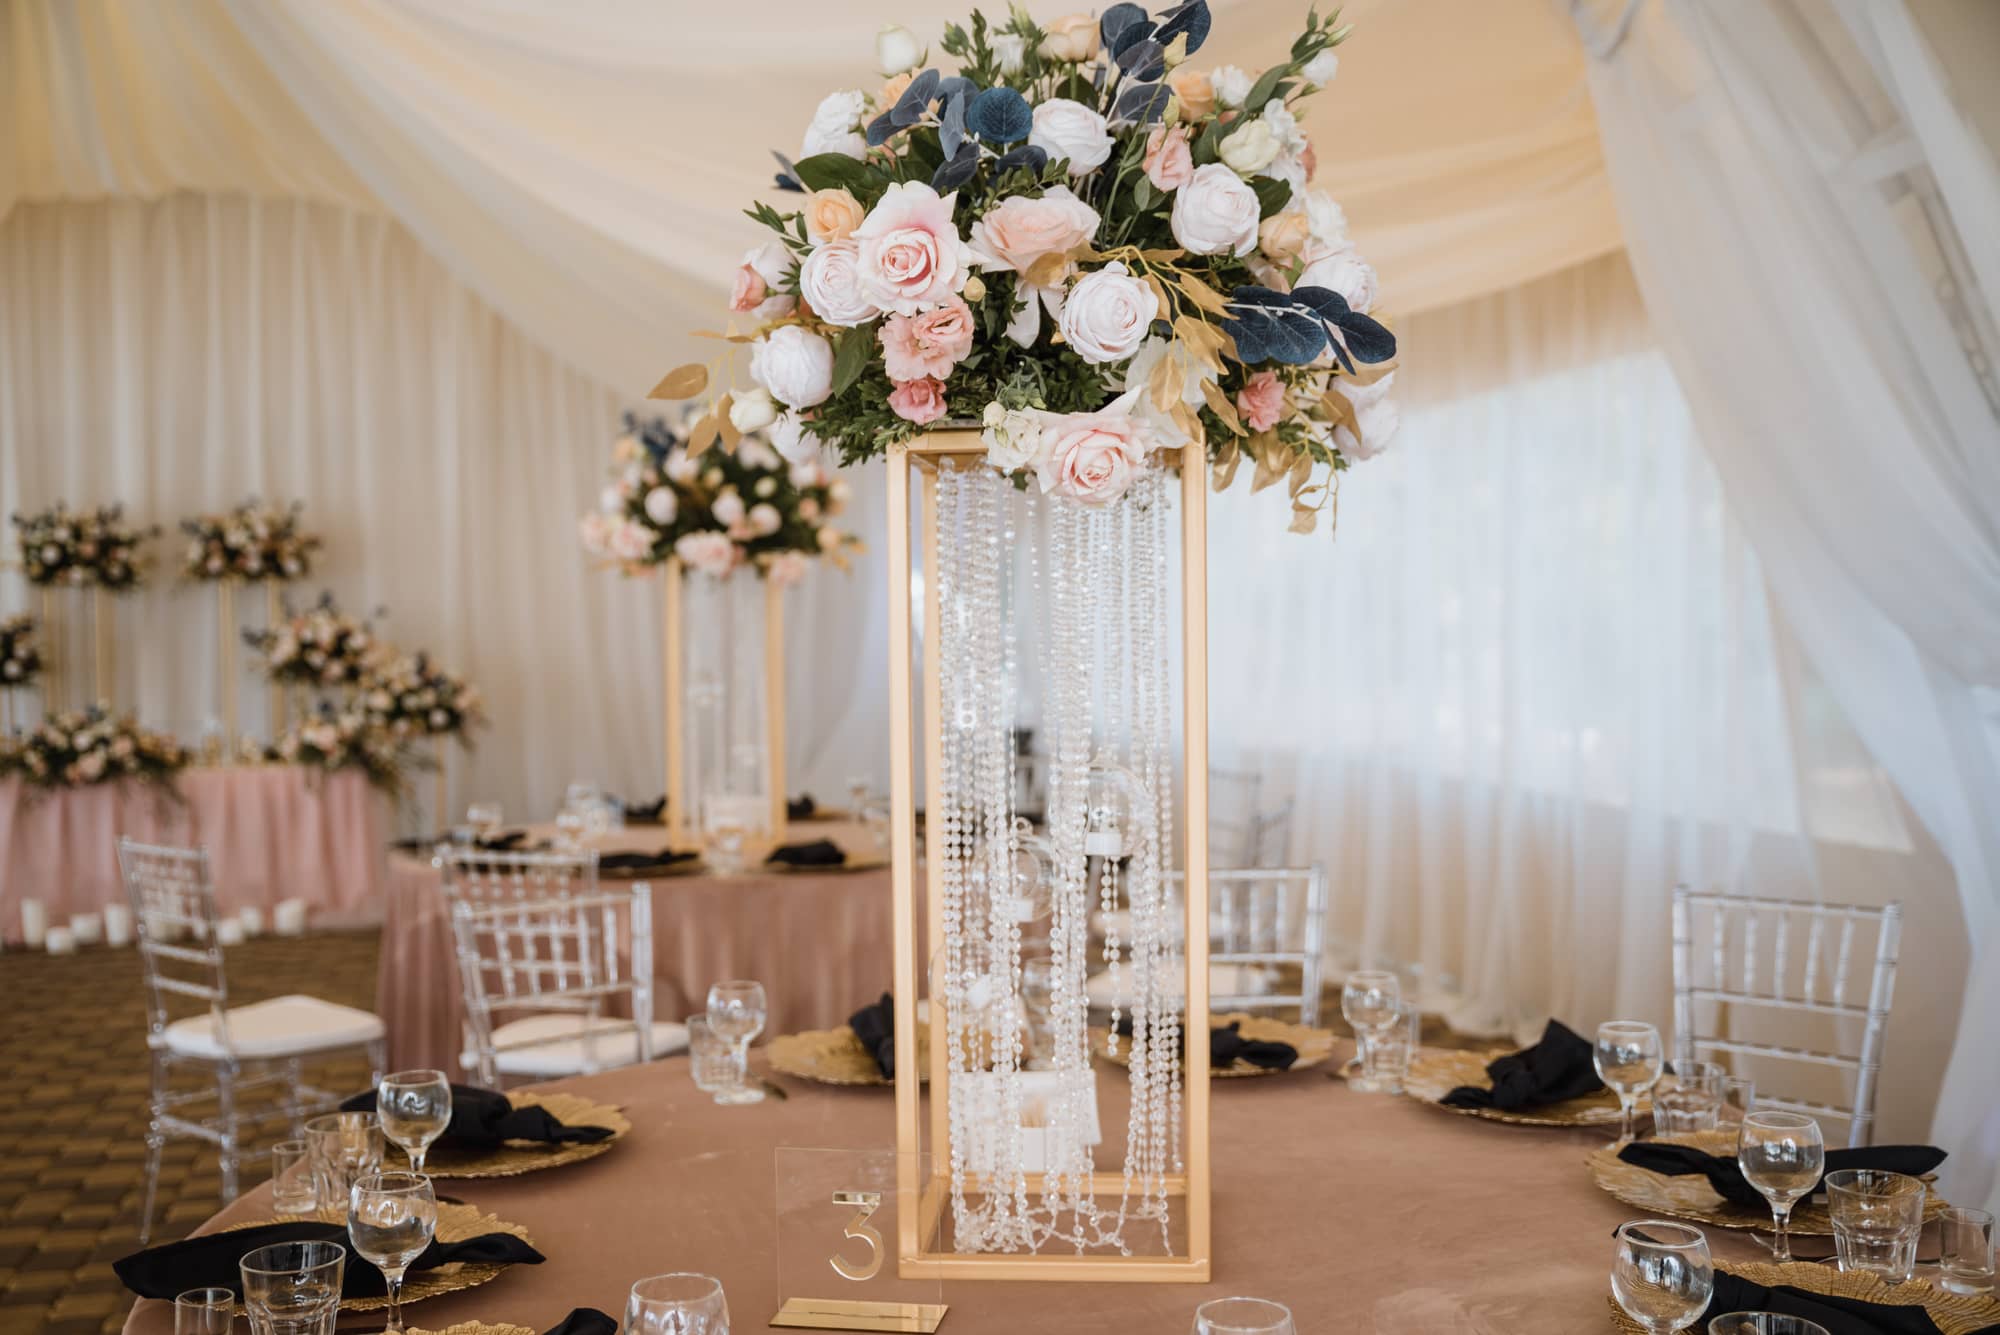 How To Make Tall Wedding Centerpieces